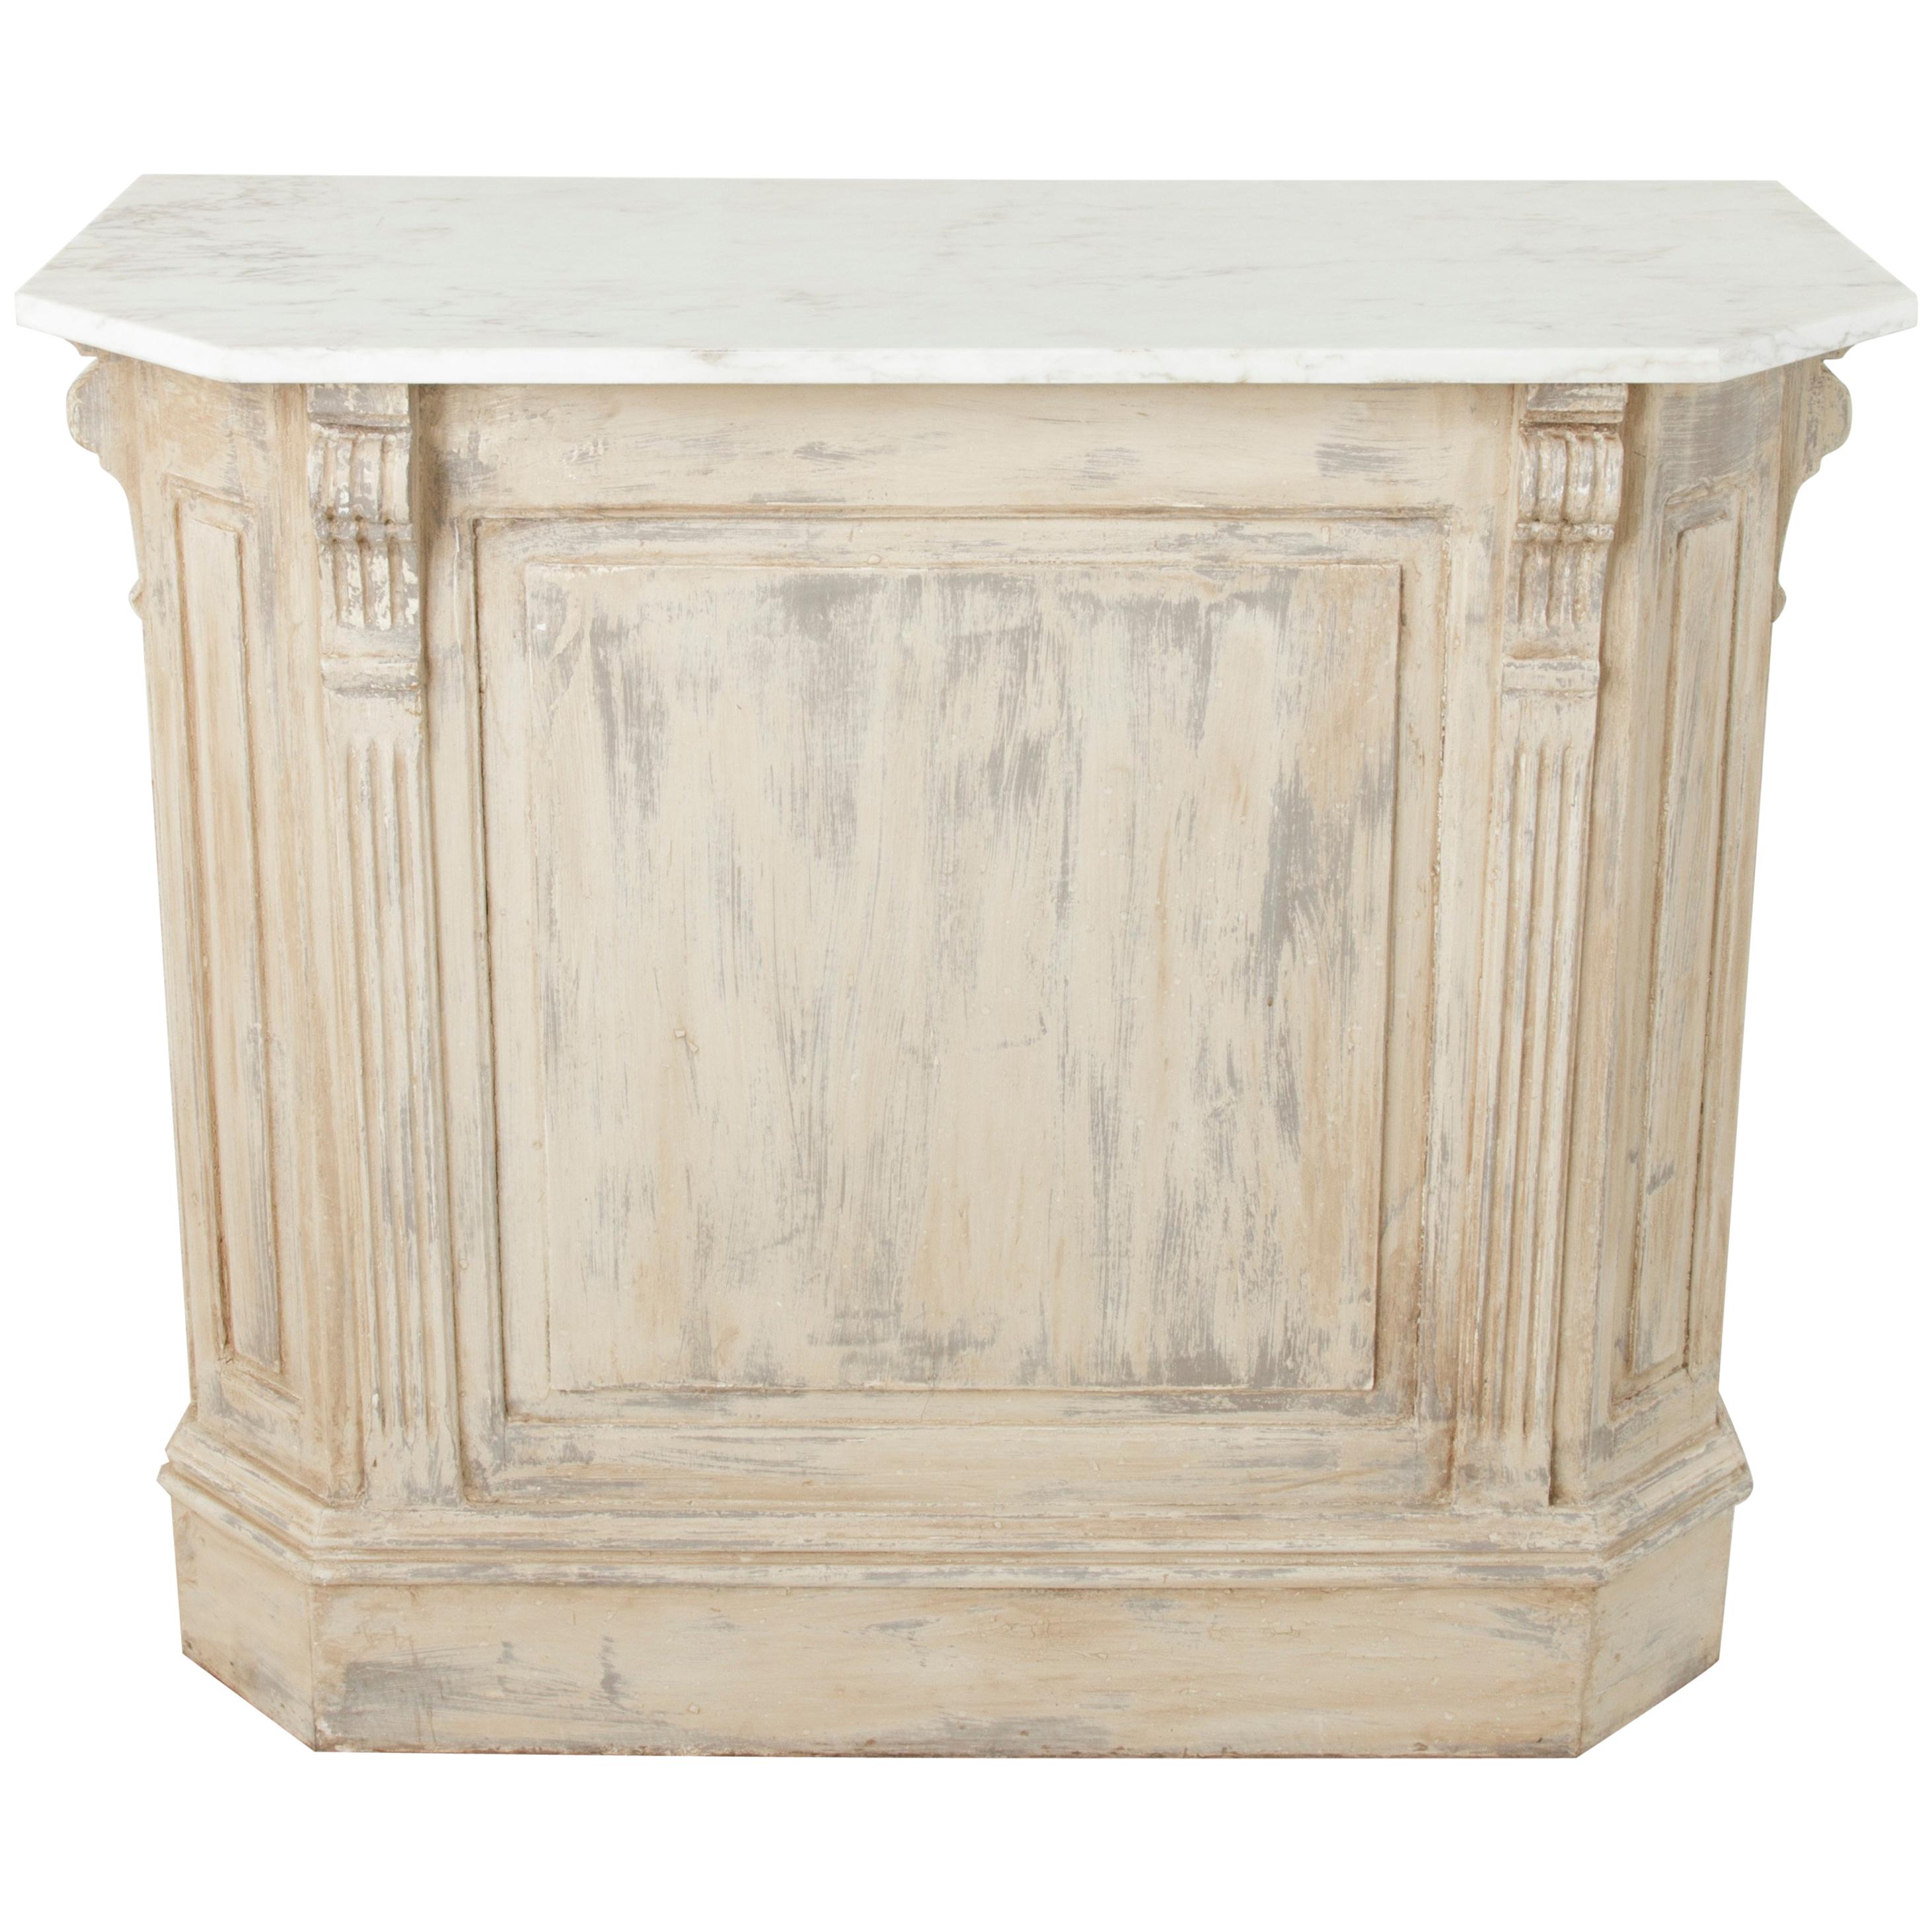 Painted Dry Bar or Counter with Veined White Marble Top, circa 1900